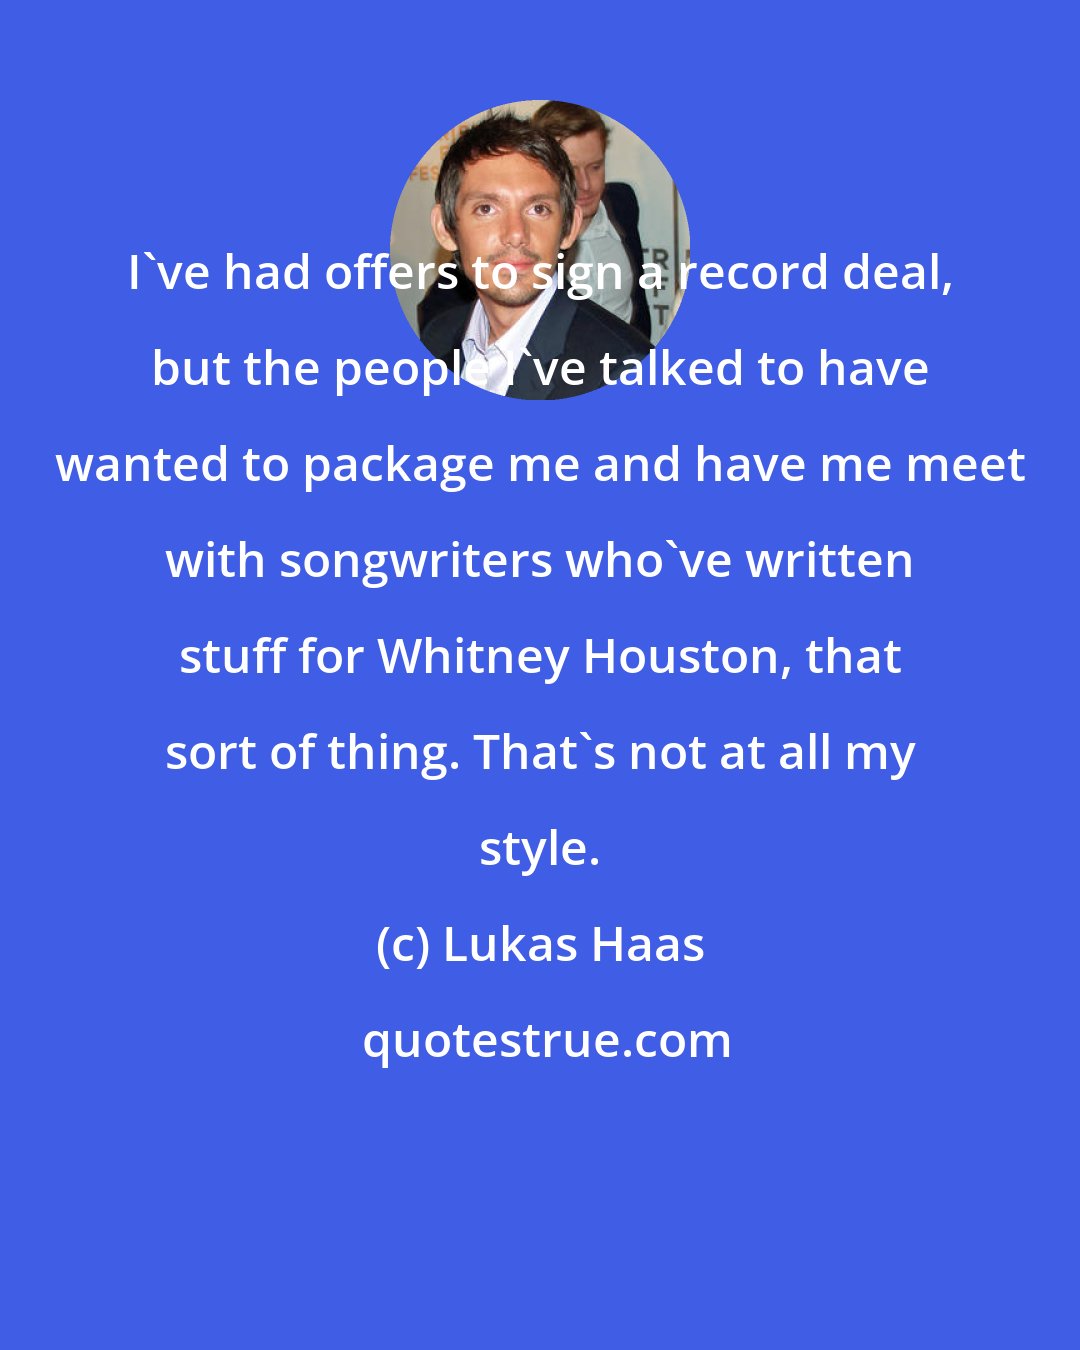 Lukas Haas: I've had offers to sign a record deal, but the people I've talked to have wanted to package me and have me meet with songwriters who've written stuff for Whitney Houston, that sort of thing. That's not at all my style.